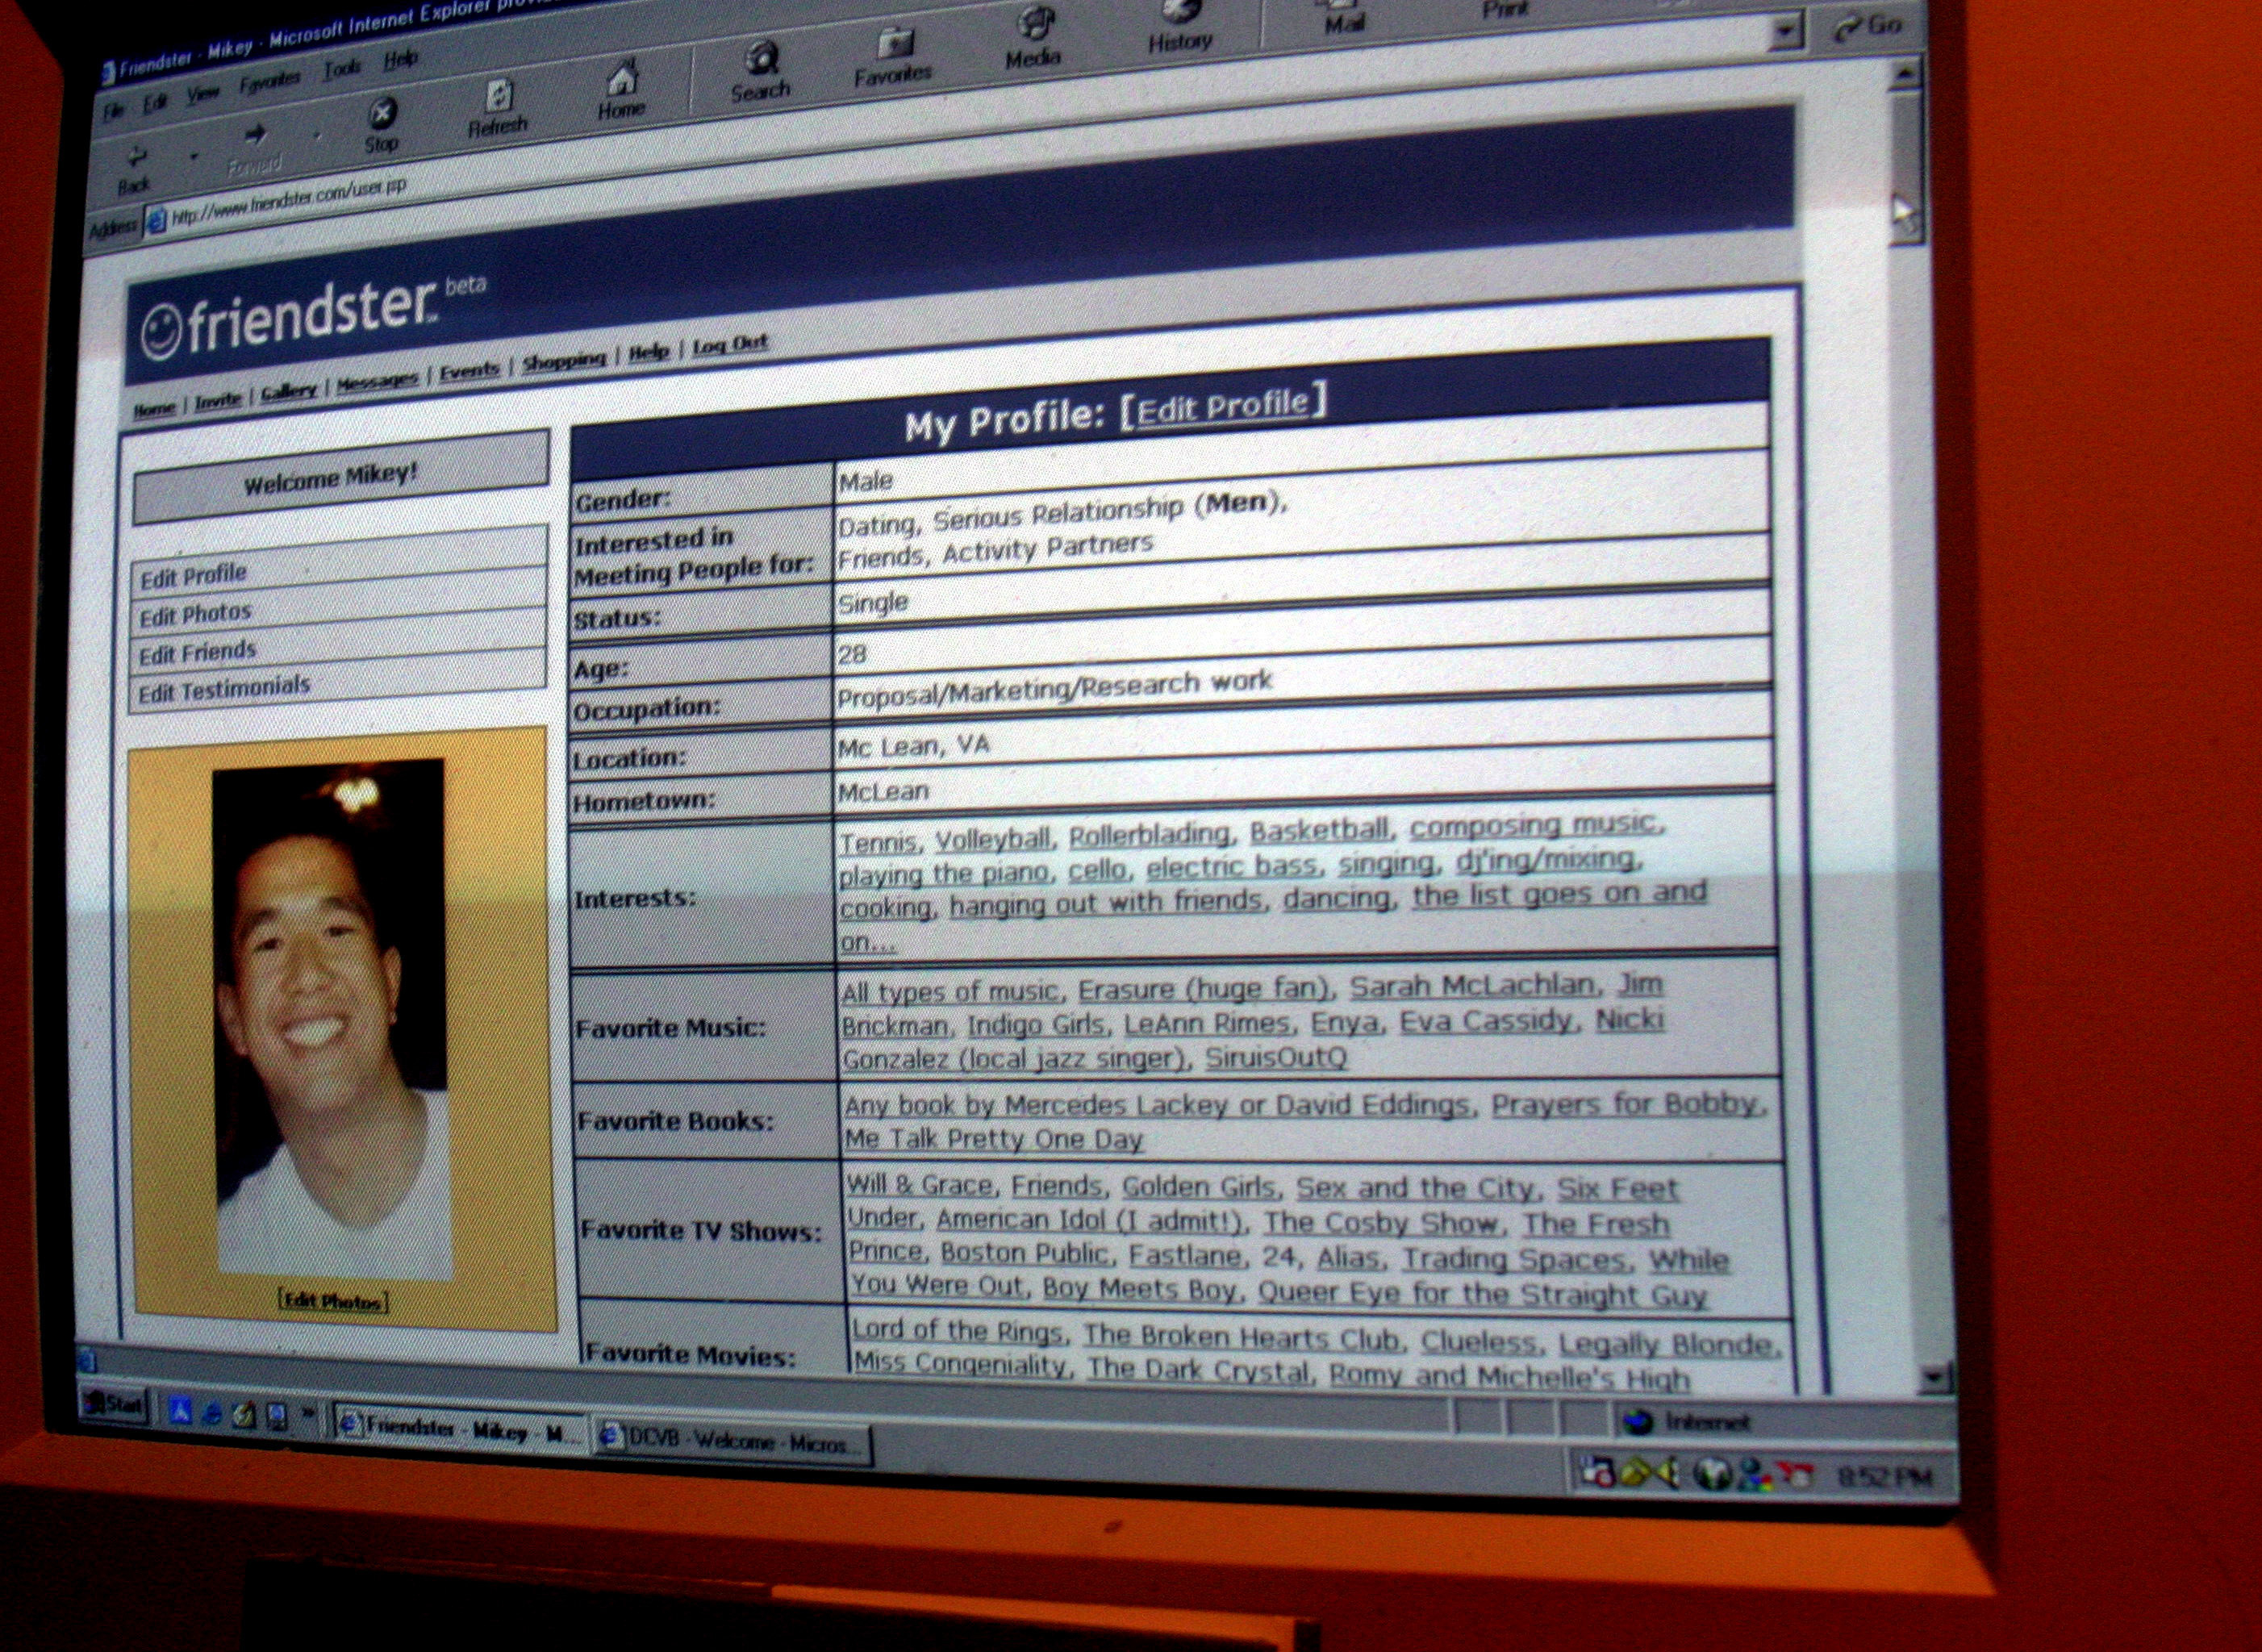 An old desktop monitor showing a Friendster page